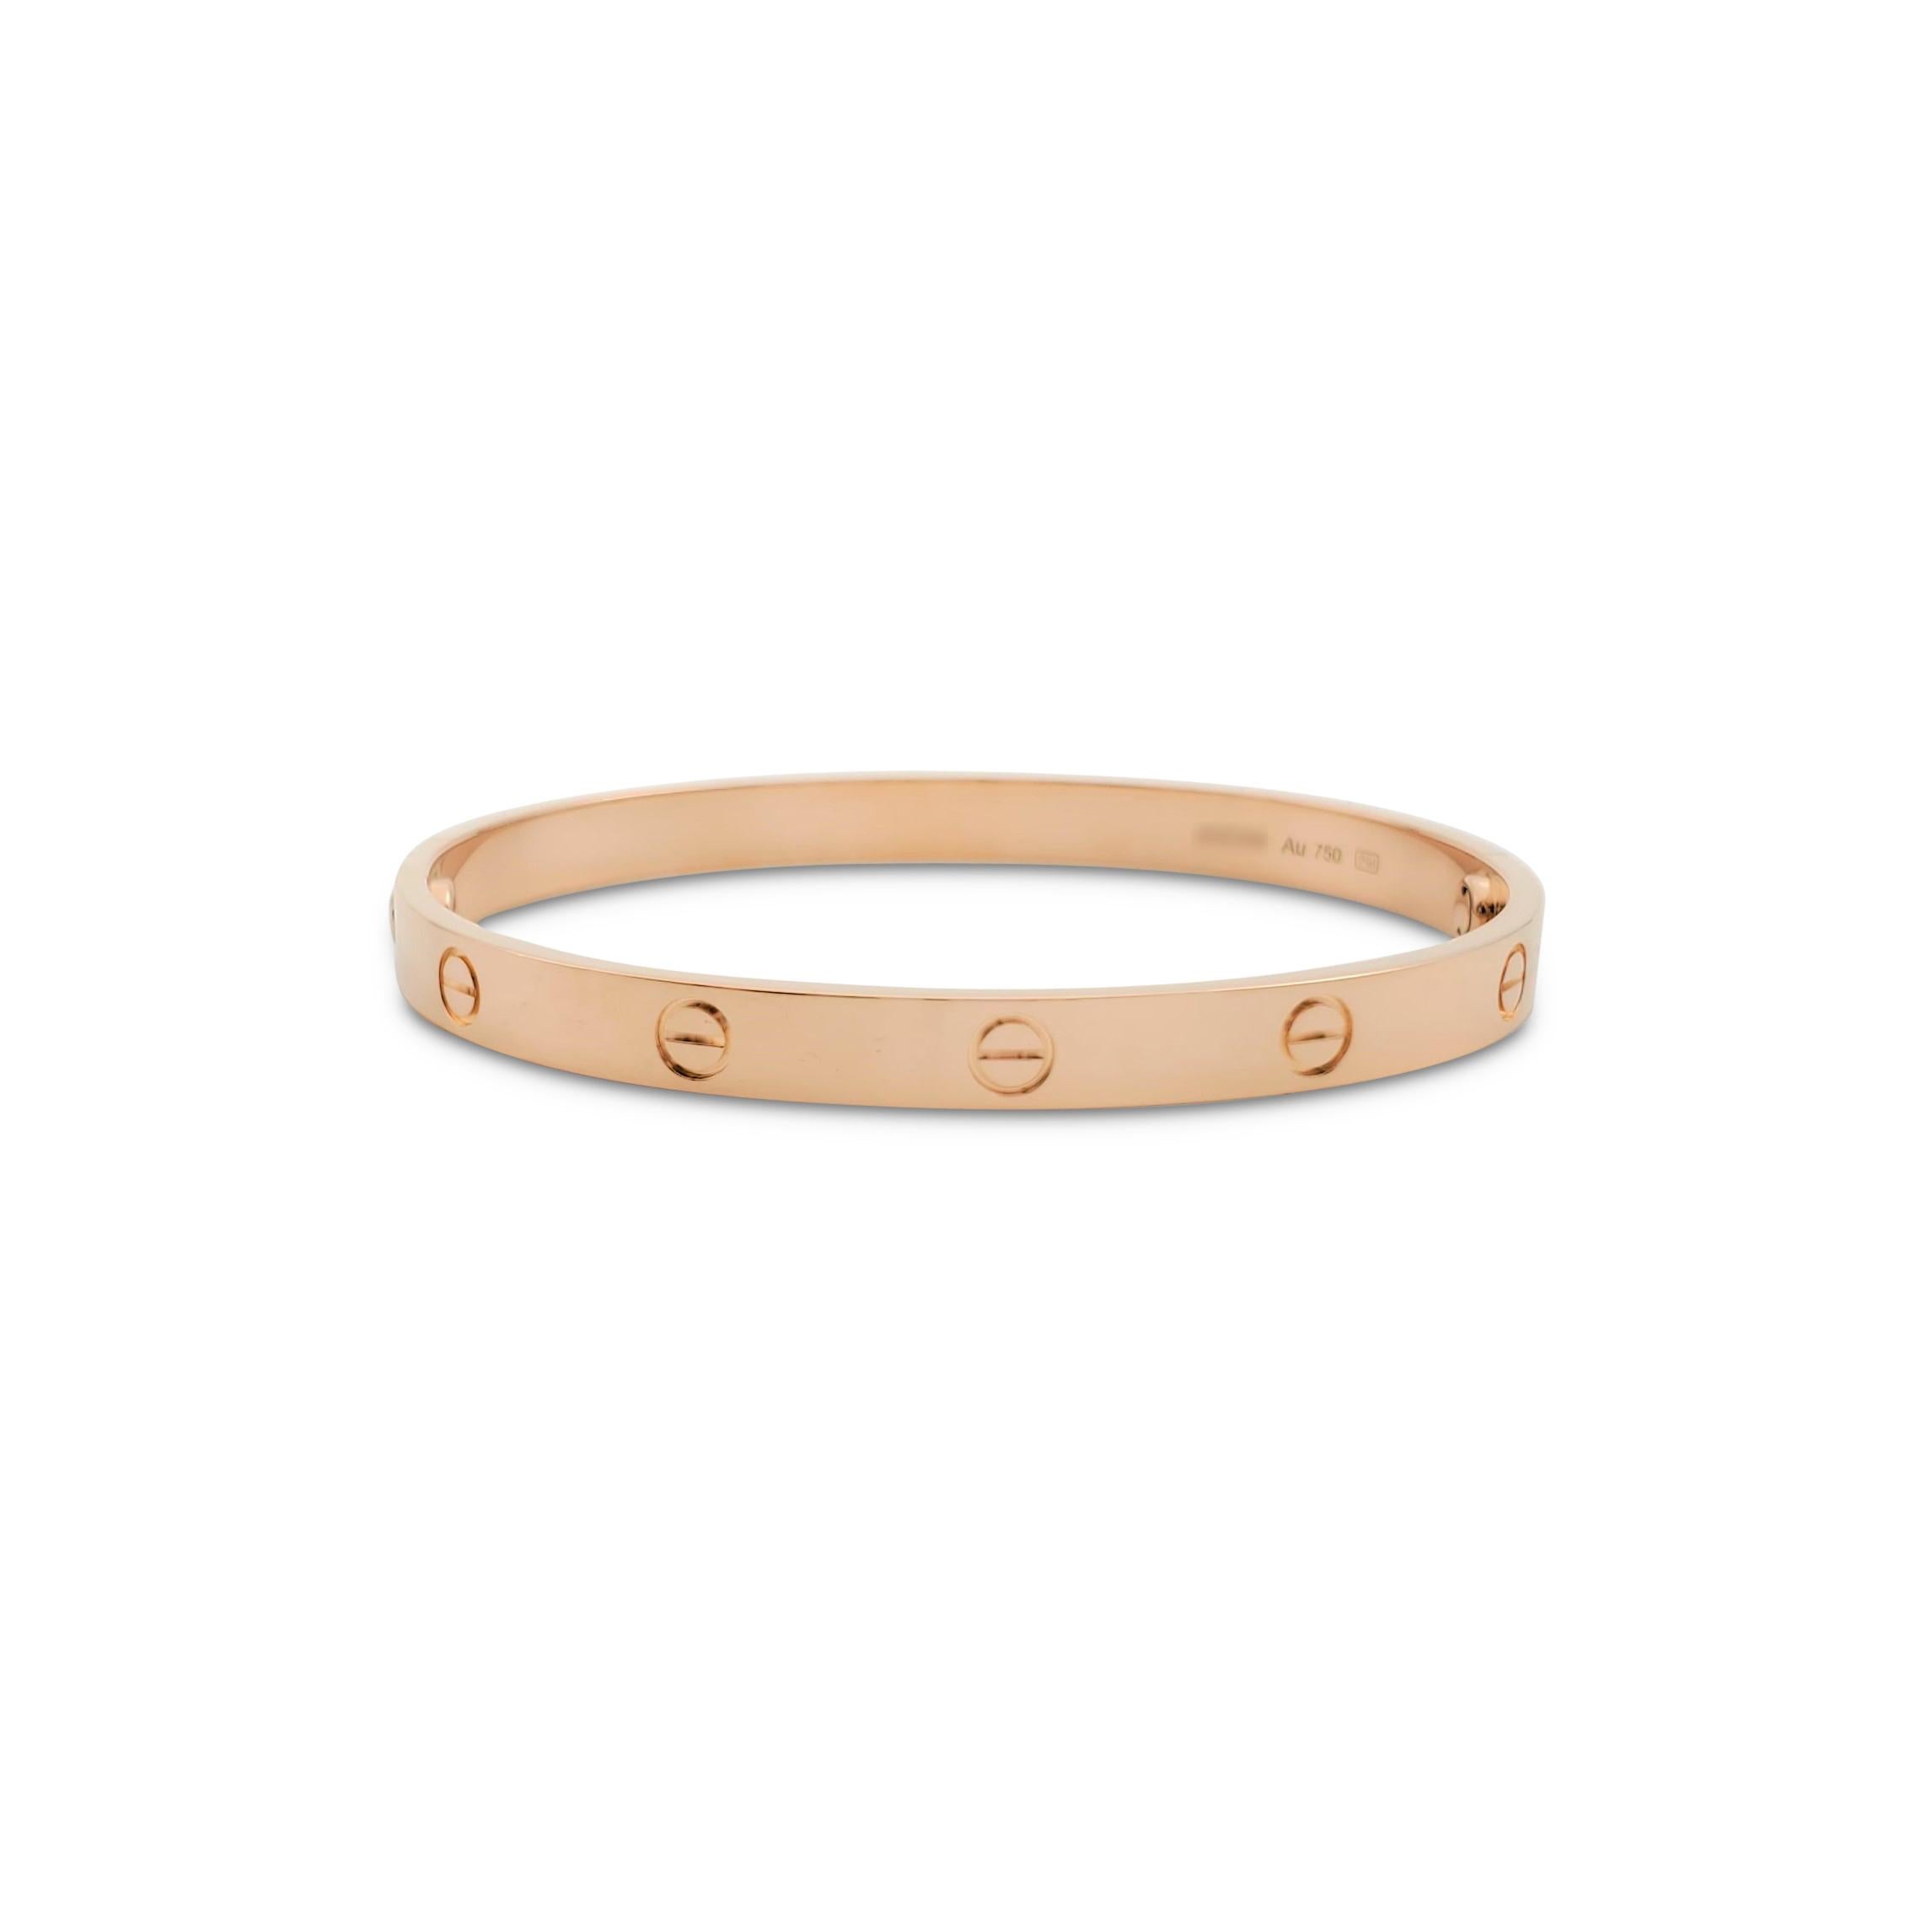 Authentic Cartier 'Love' bracelet crafted in 18 karat rose gold. Size 19. Signed Cartier, 17, Au750, with serial number and hallmarks. The bracelet is presented with the original box, papers, and screwdriver. CIRCA 2010s.

Bracelet Size: 19
Box: